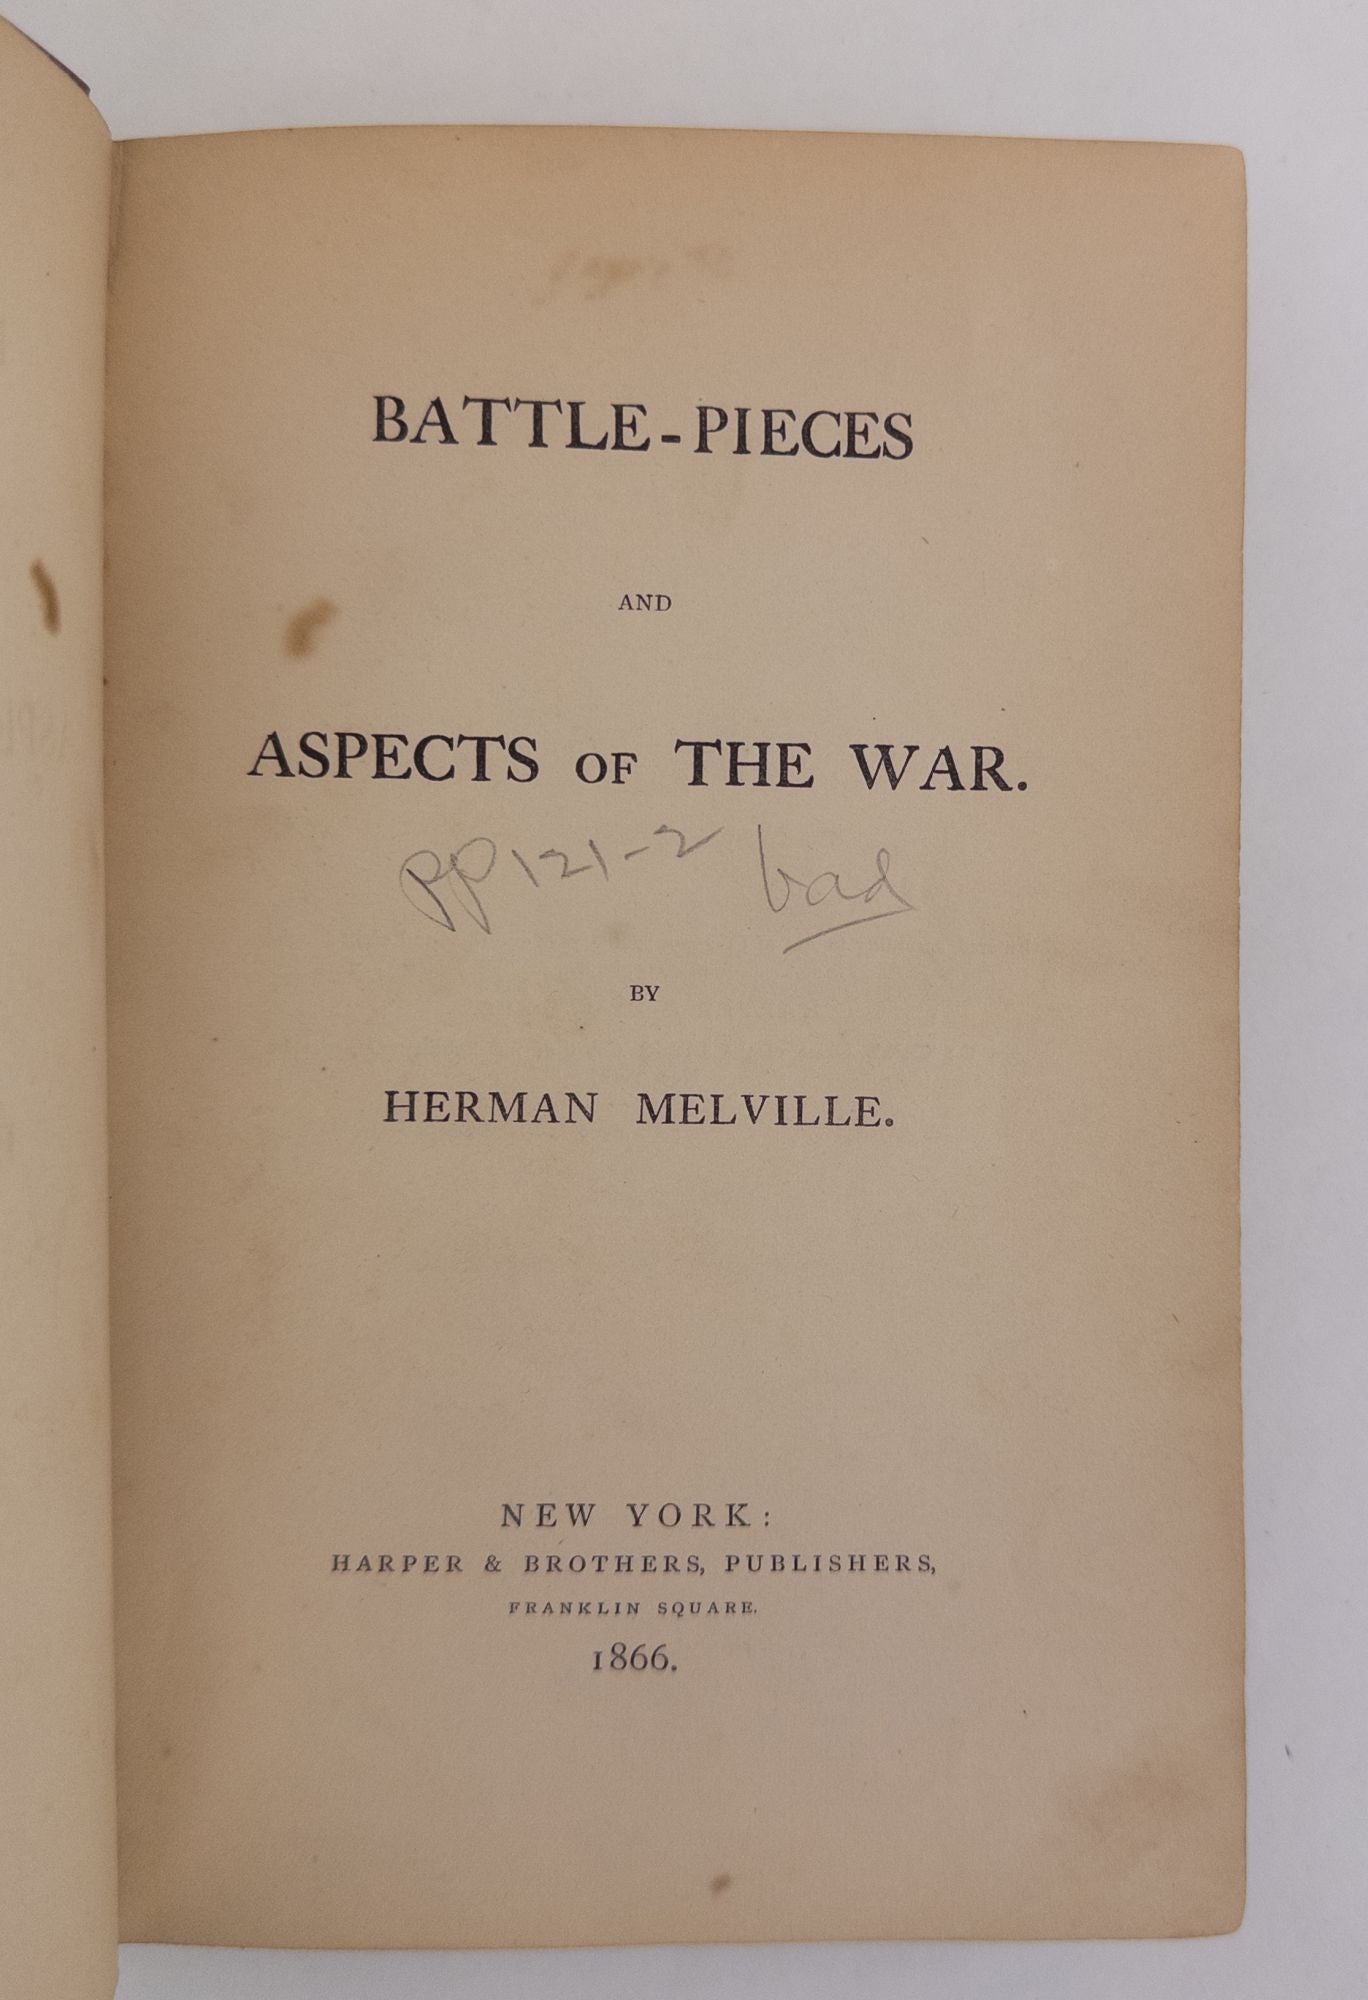 Product Image for BATTLE-PIECES AND ASPECTS OF THE WAR